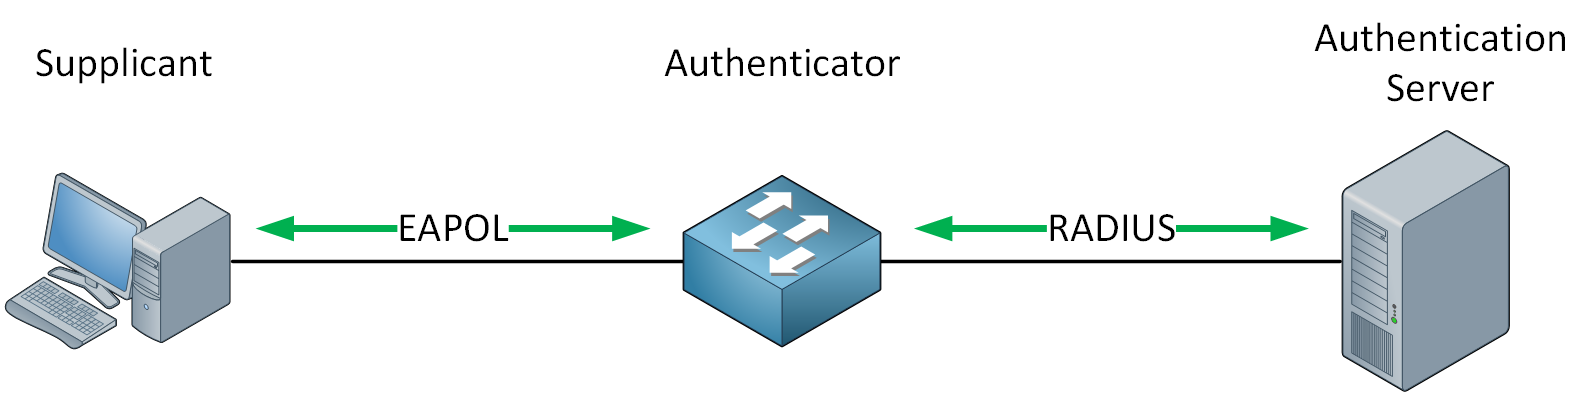 EAPOL (Extensible Authentication Protocol over LAN)